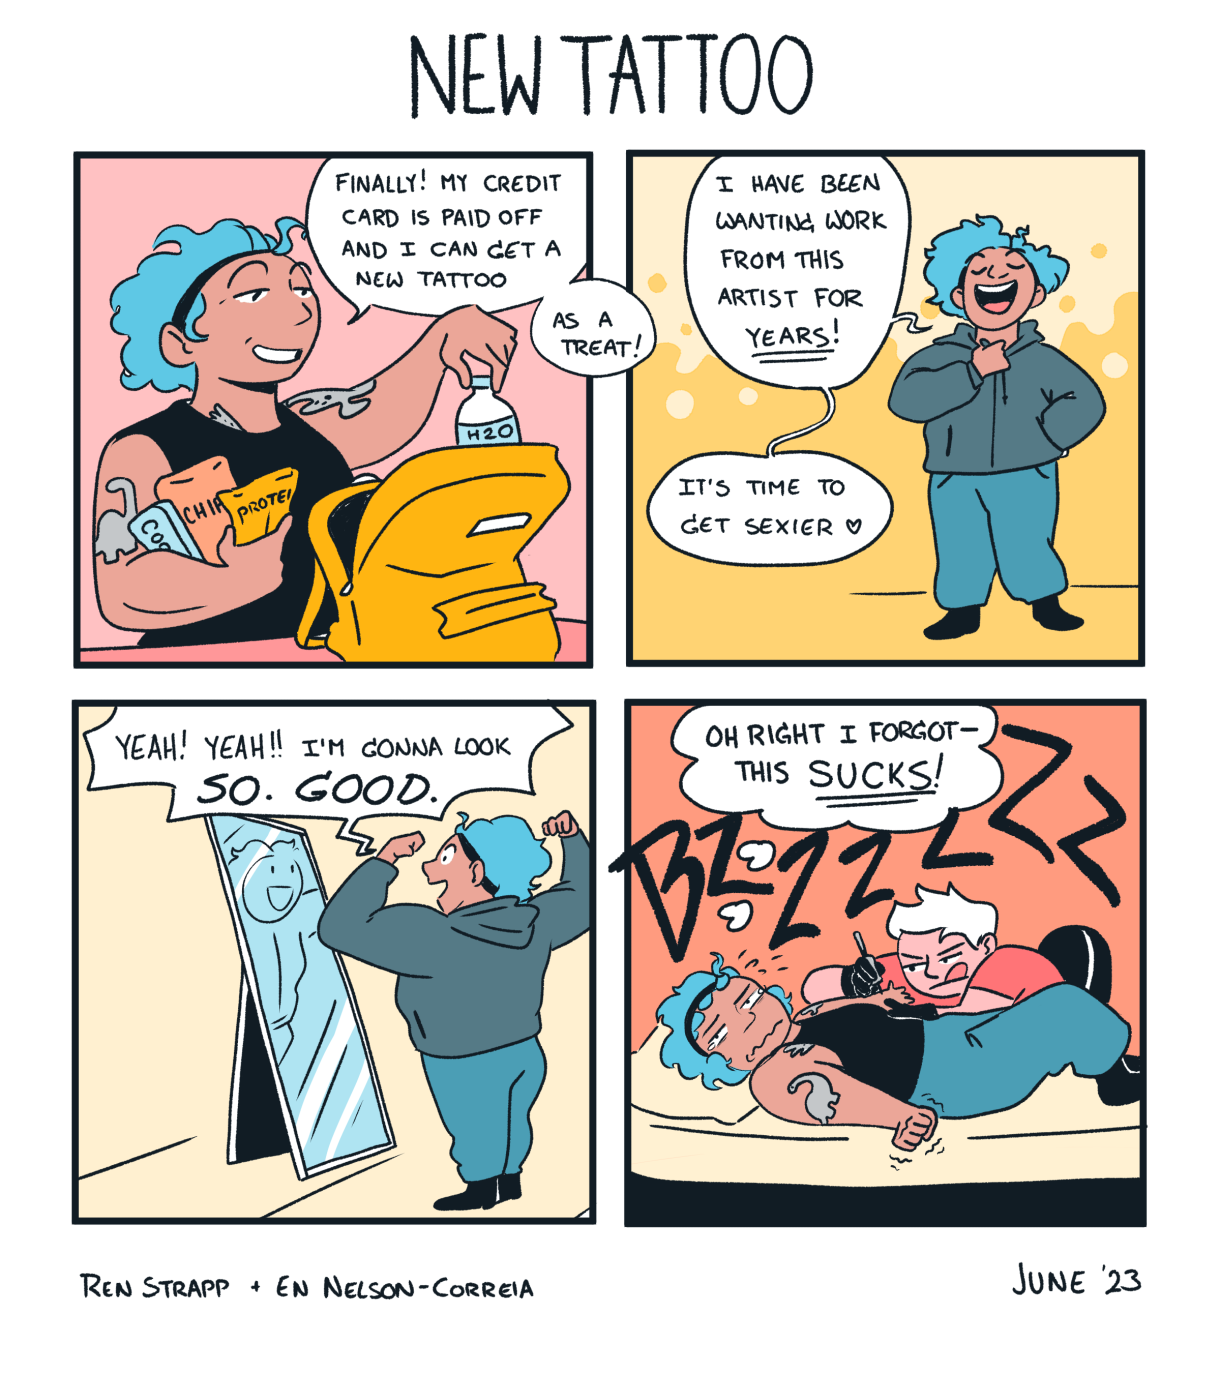 A four panel comic of a queer person with blue hair who says “Finally! My credit card is paid off and I can can get a new tattoo as a treat! I have been wanting work from this artist for years! It’s time get sexier!